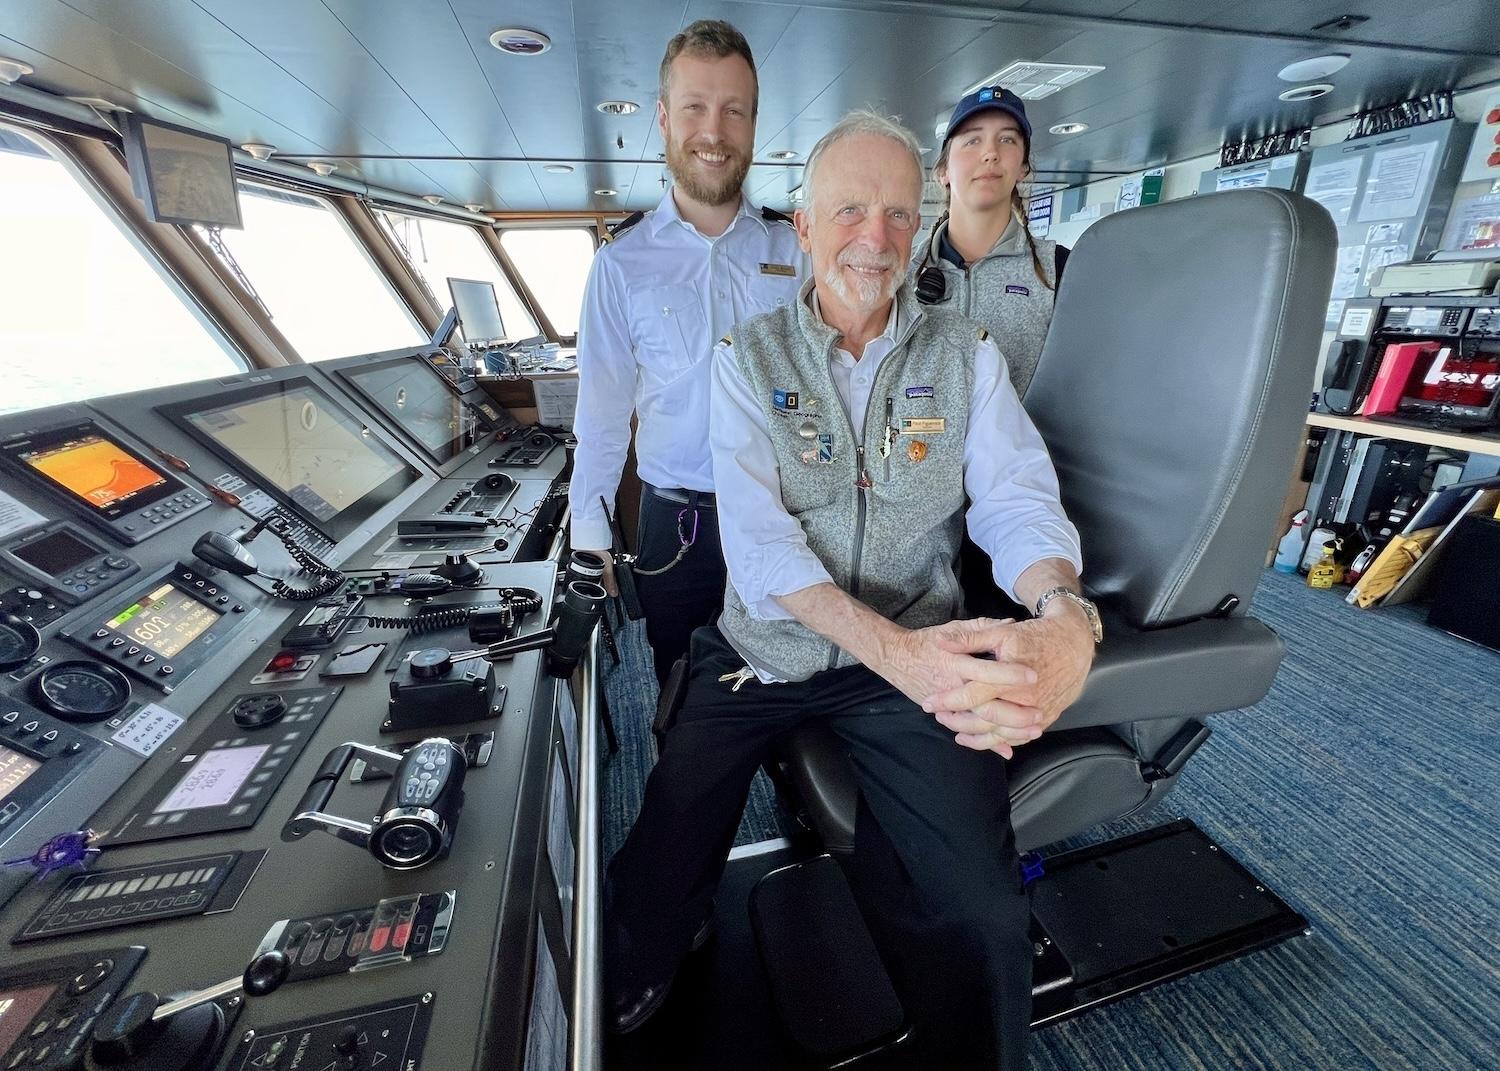 The National Geographic Quest has an open bridge policy so you can meet Third Mate Colby Brown, Captain Paul Figuenick and Deckhand Grace Welliver. 